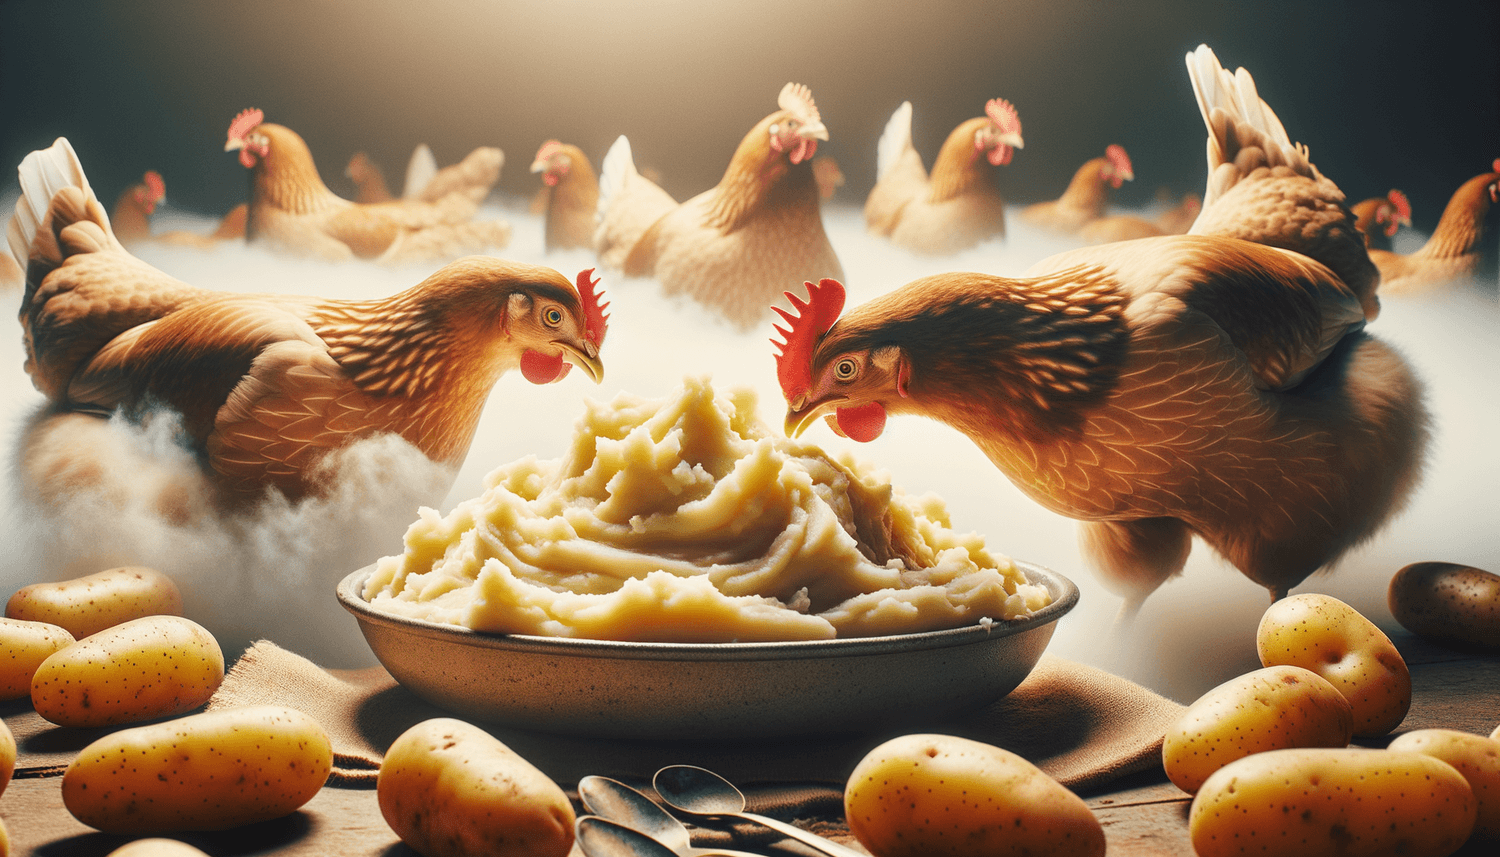 Can Chickens Eat Mashed Potatoes?